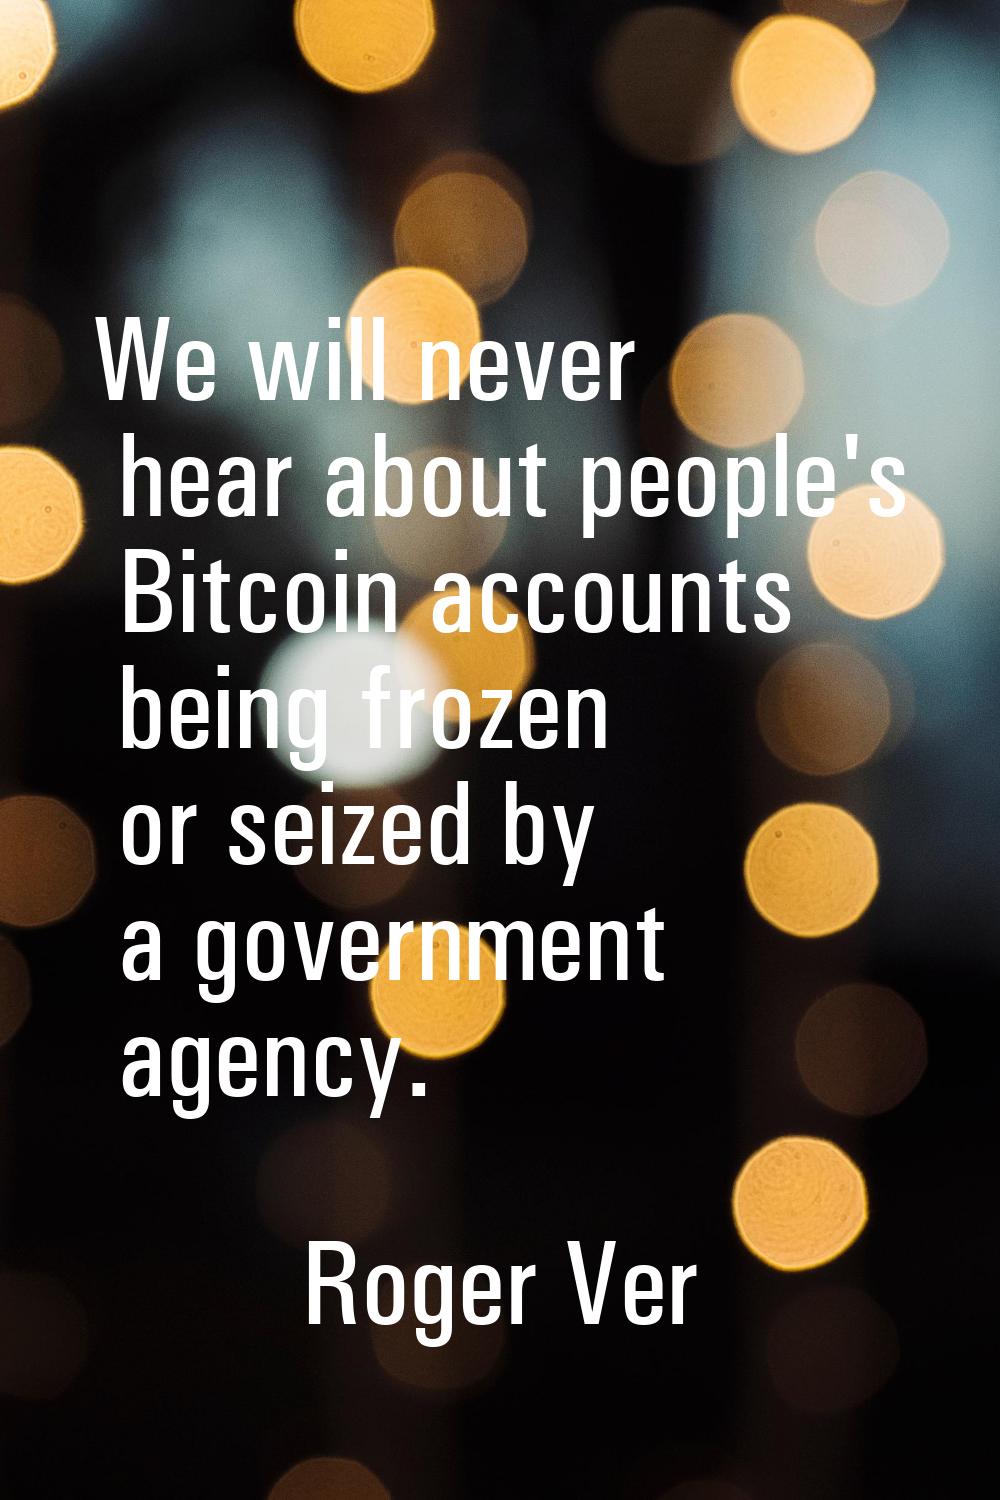 We will never hear about people's Bitcoin accounts being frozen or seized by a government agency.